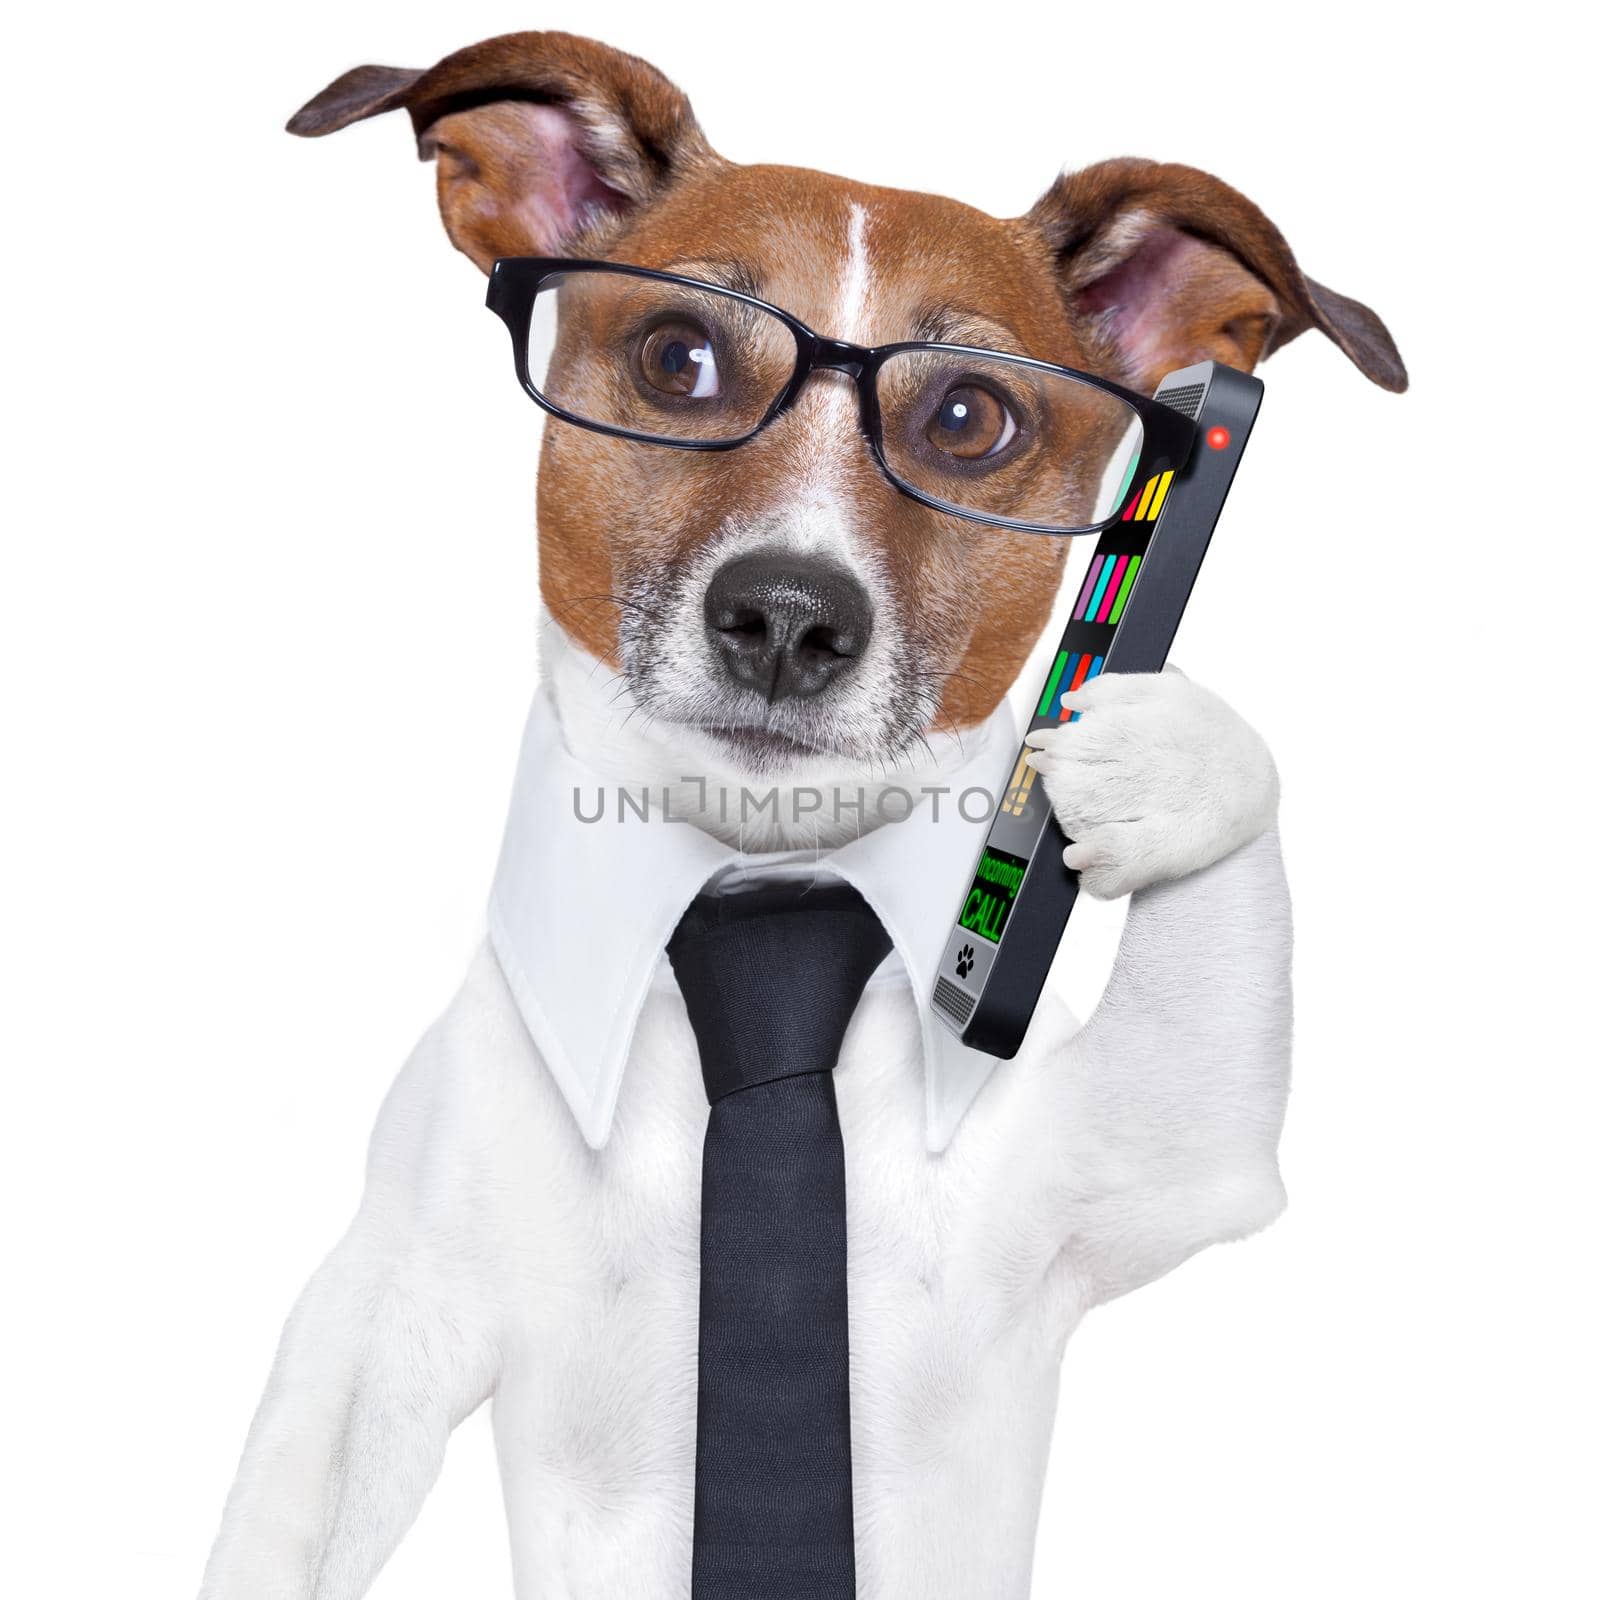 business dog with a tie and glasses